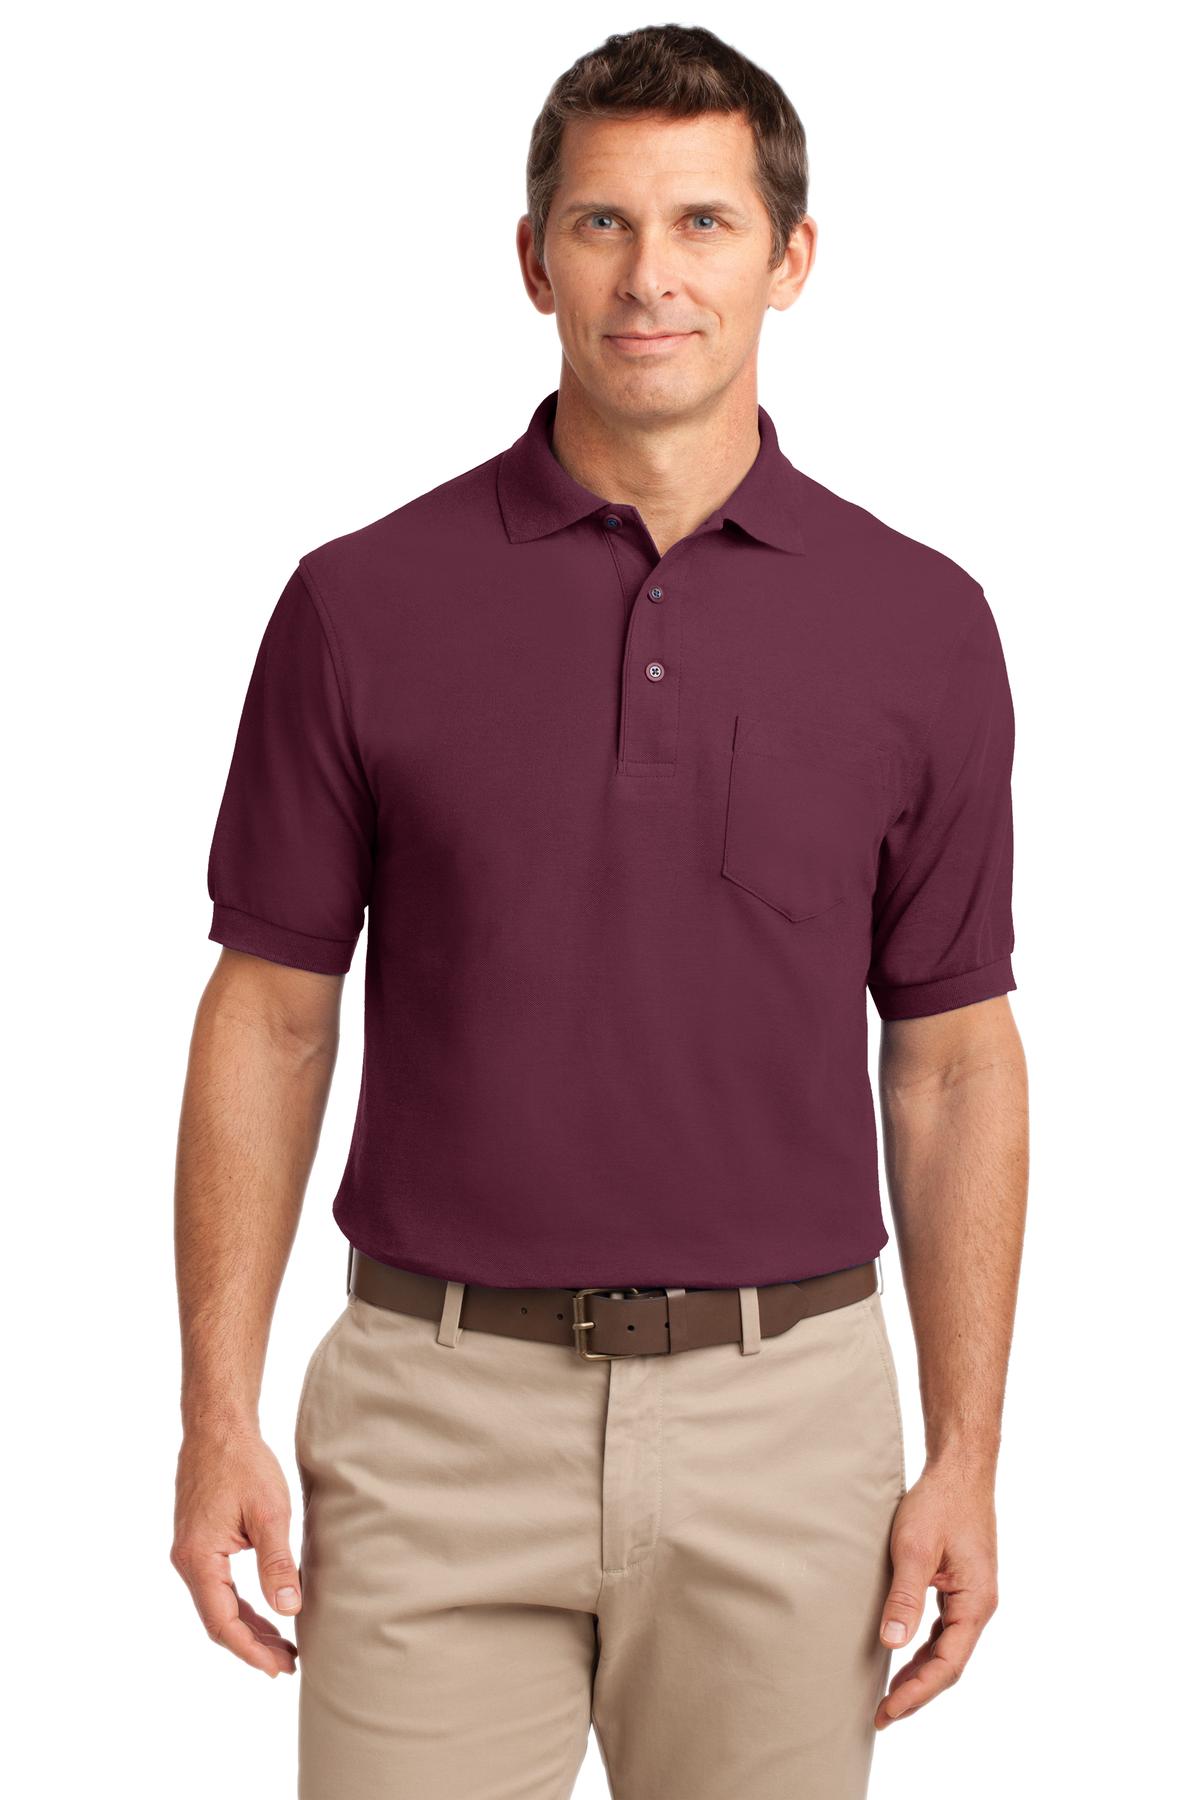 Joes USA Mens Classic Pocket Polo Shirts in Sizes XS-4XL